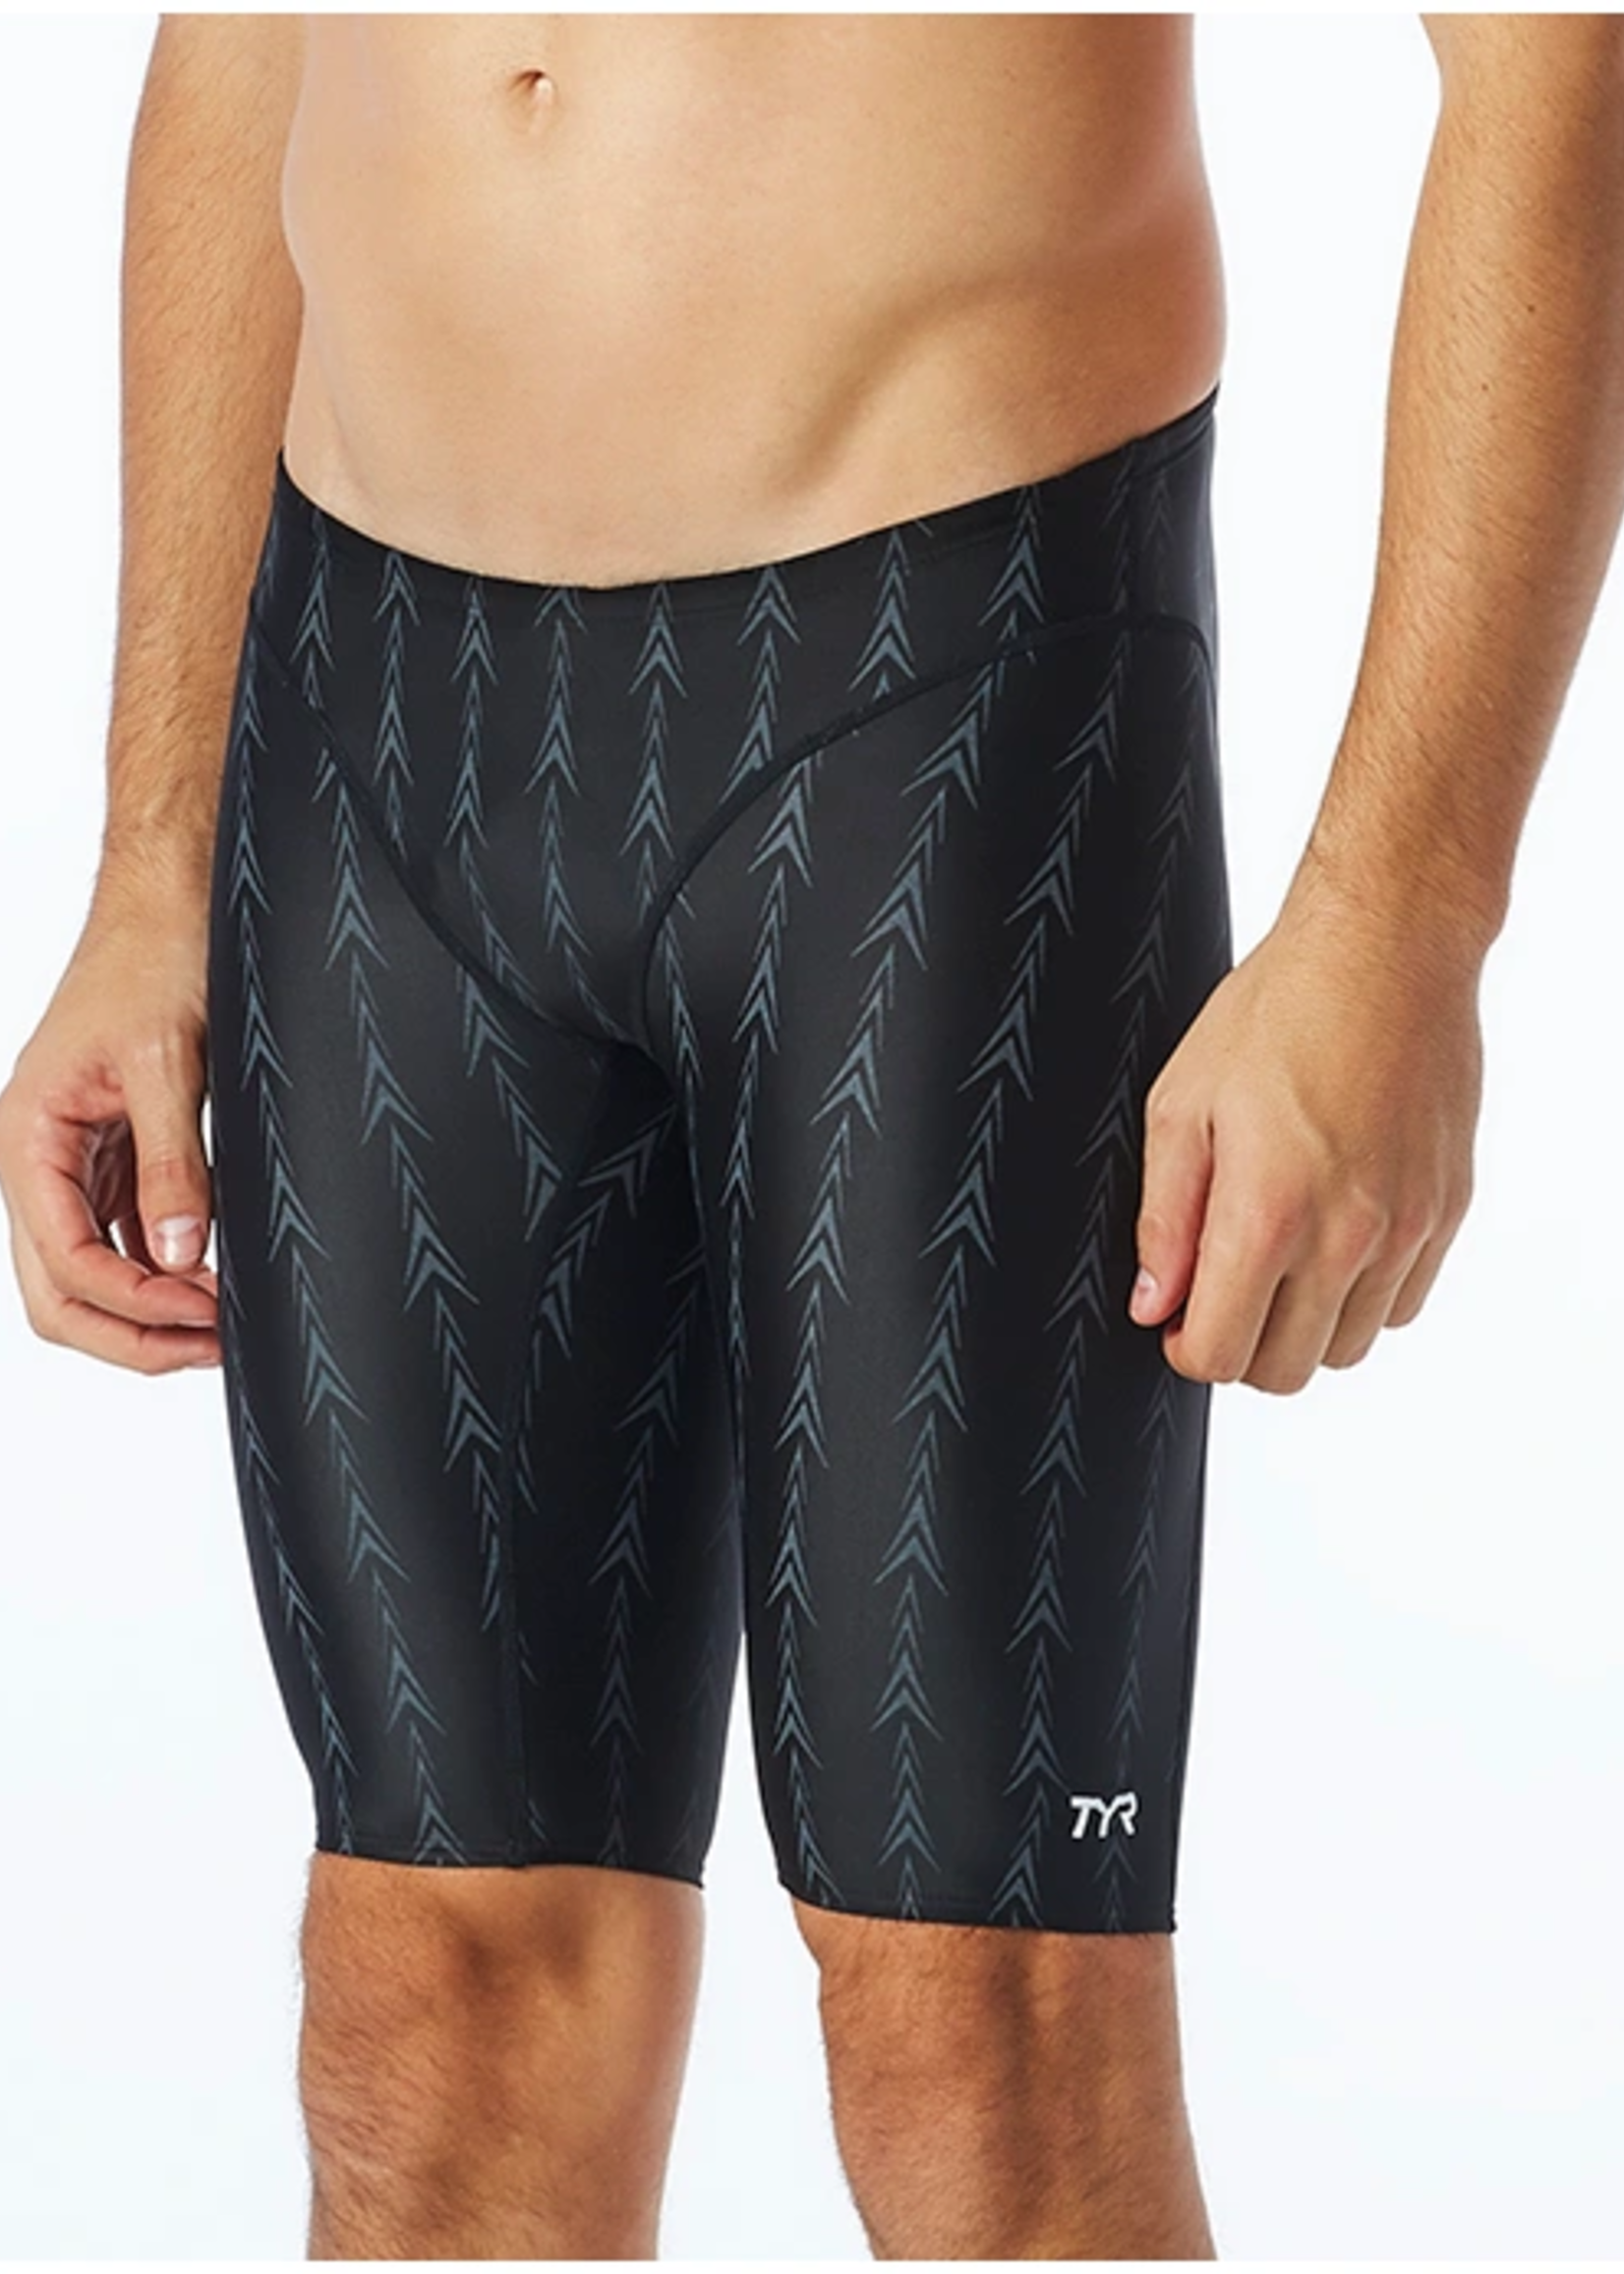 TYR Fusion 2 Jammer 001 Black